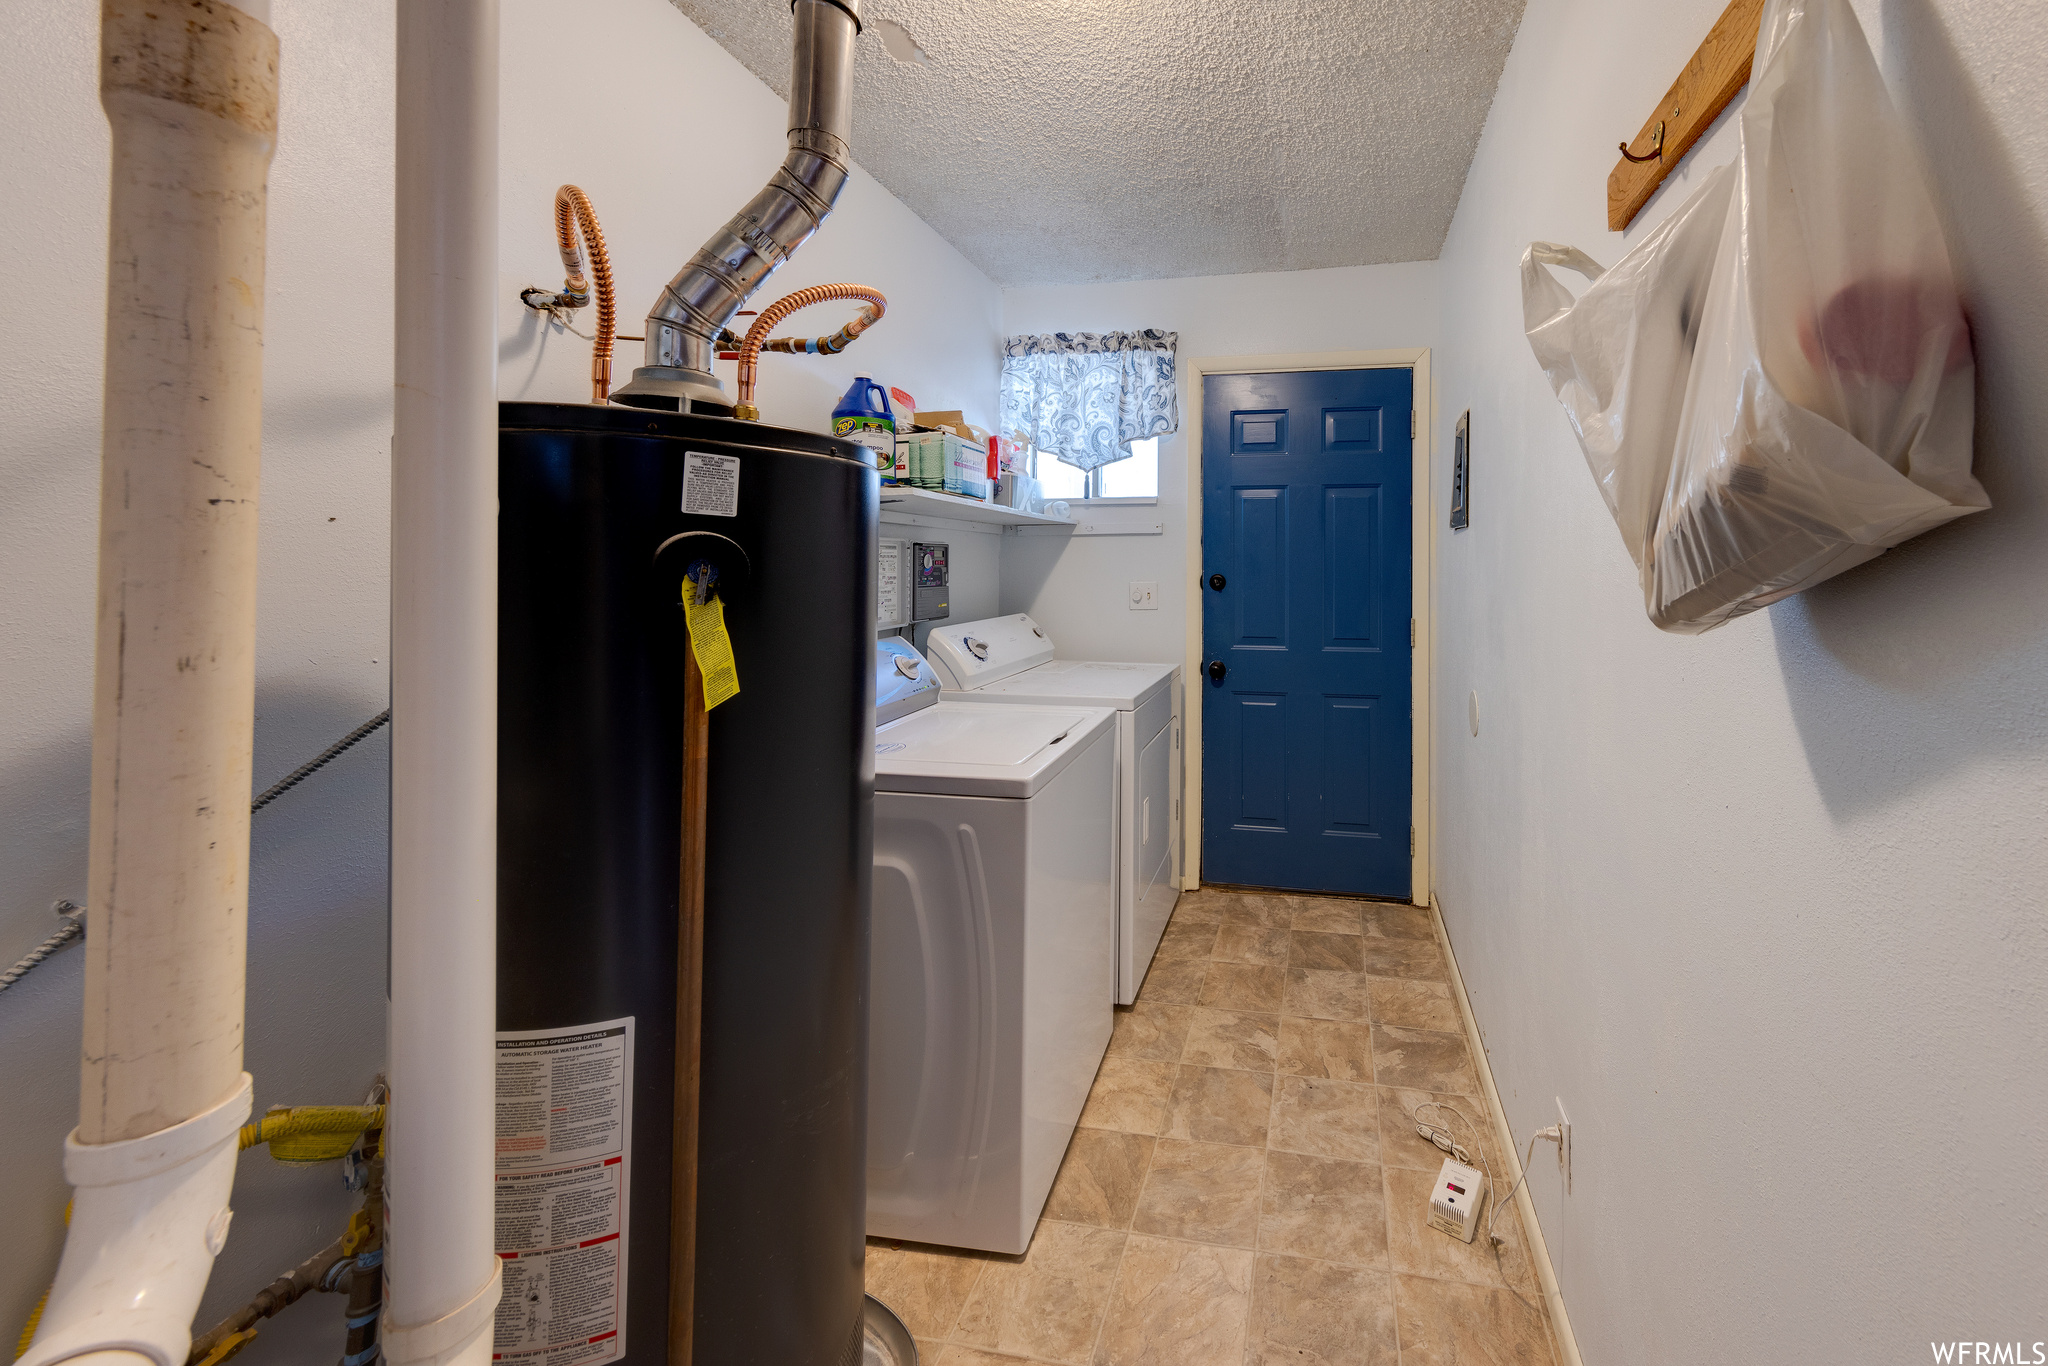 Clothes washing area, natural light, water heater, and separate washer and dryer